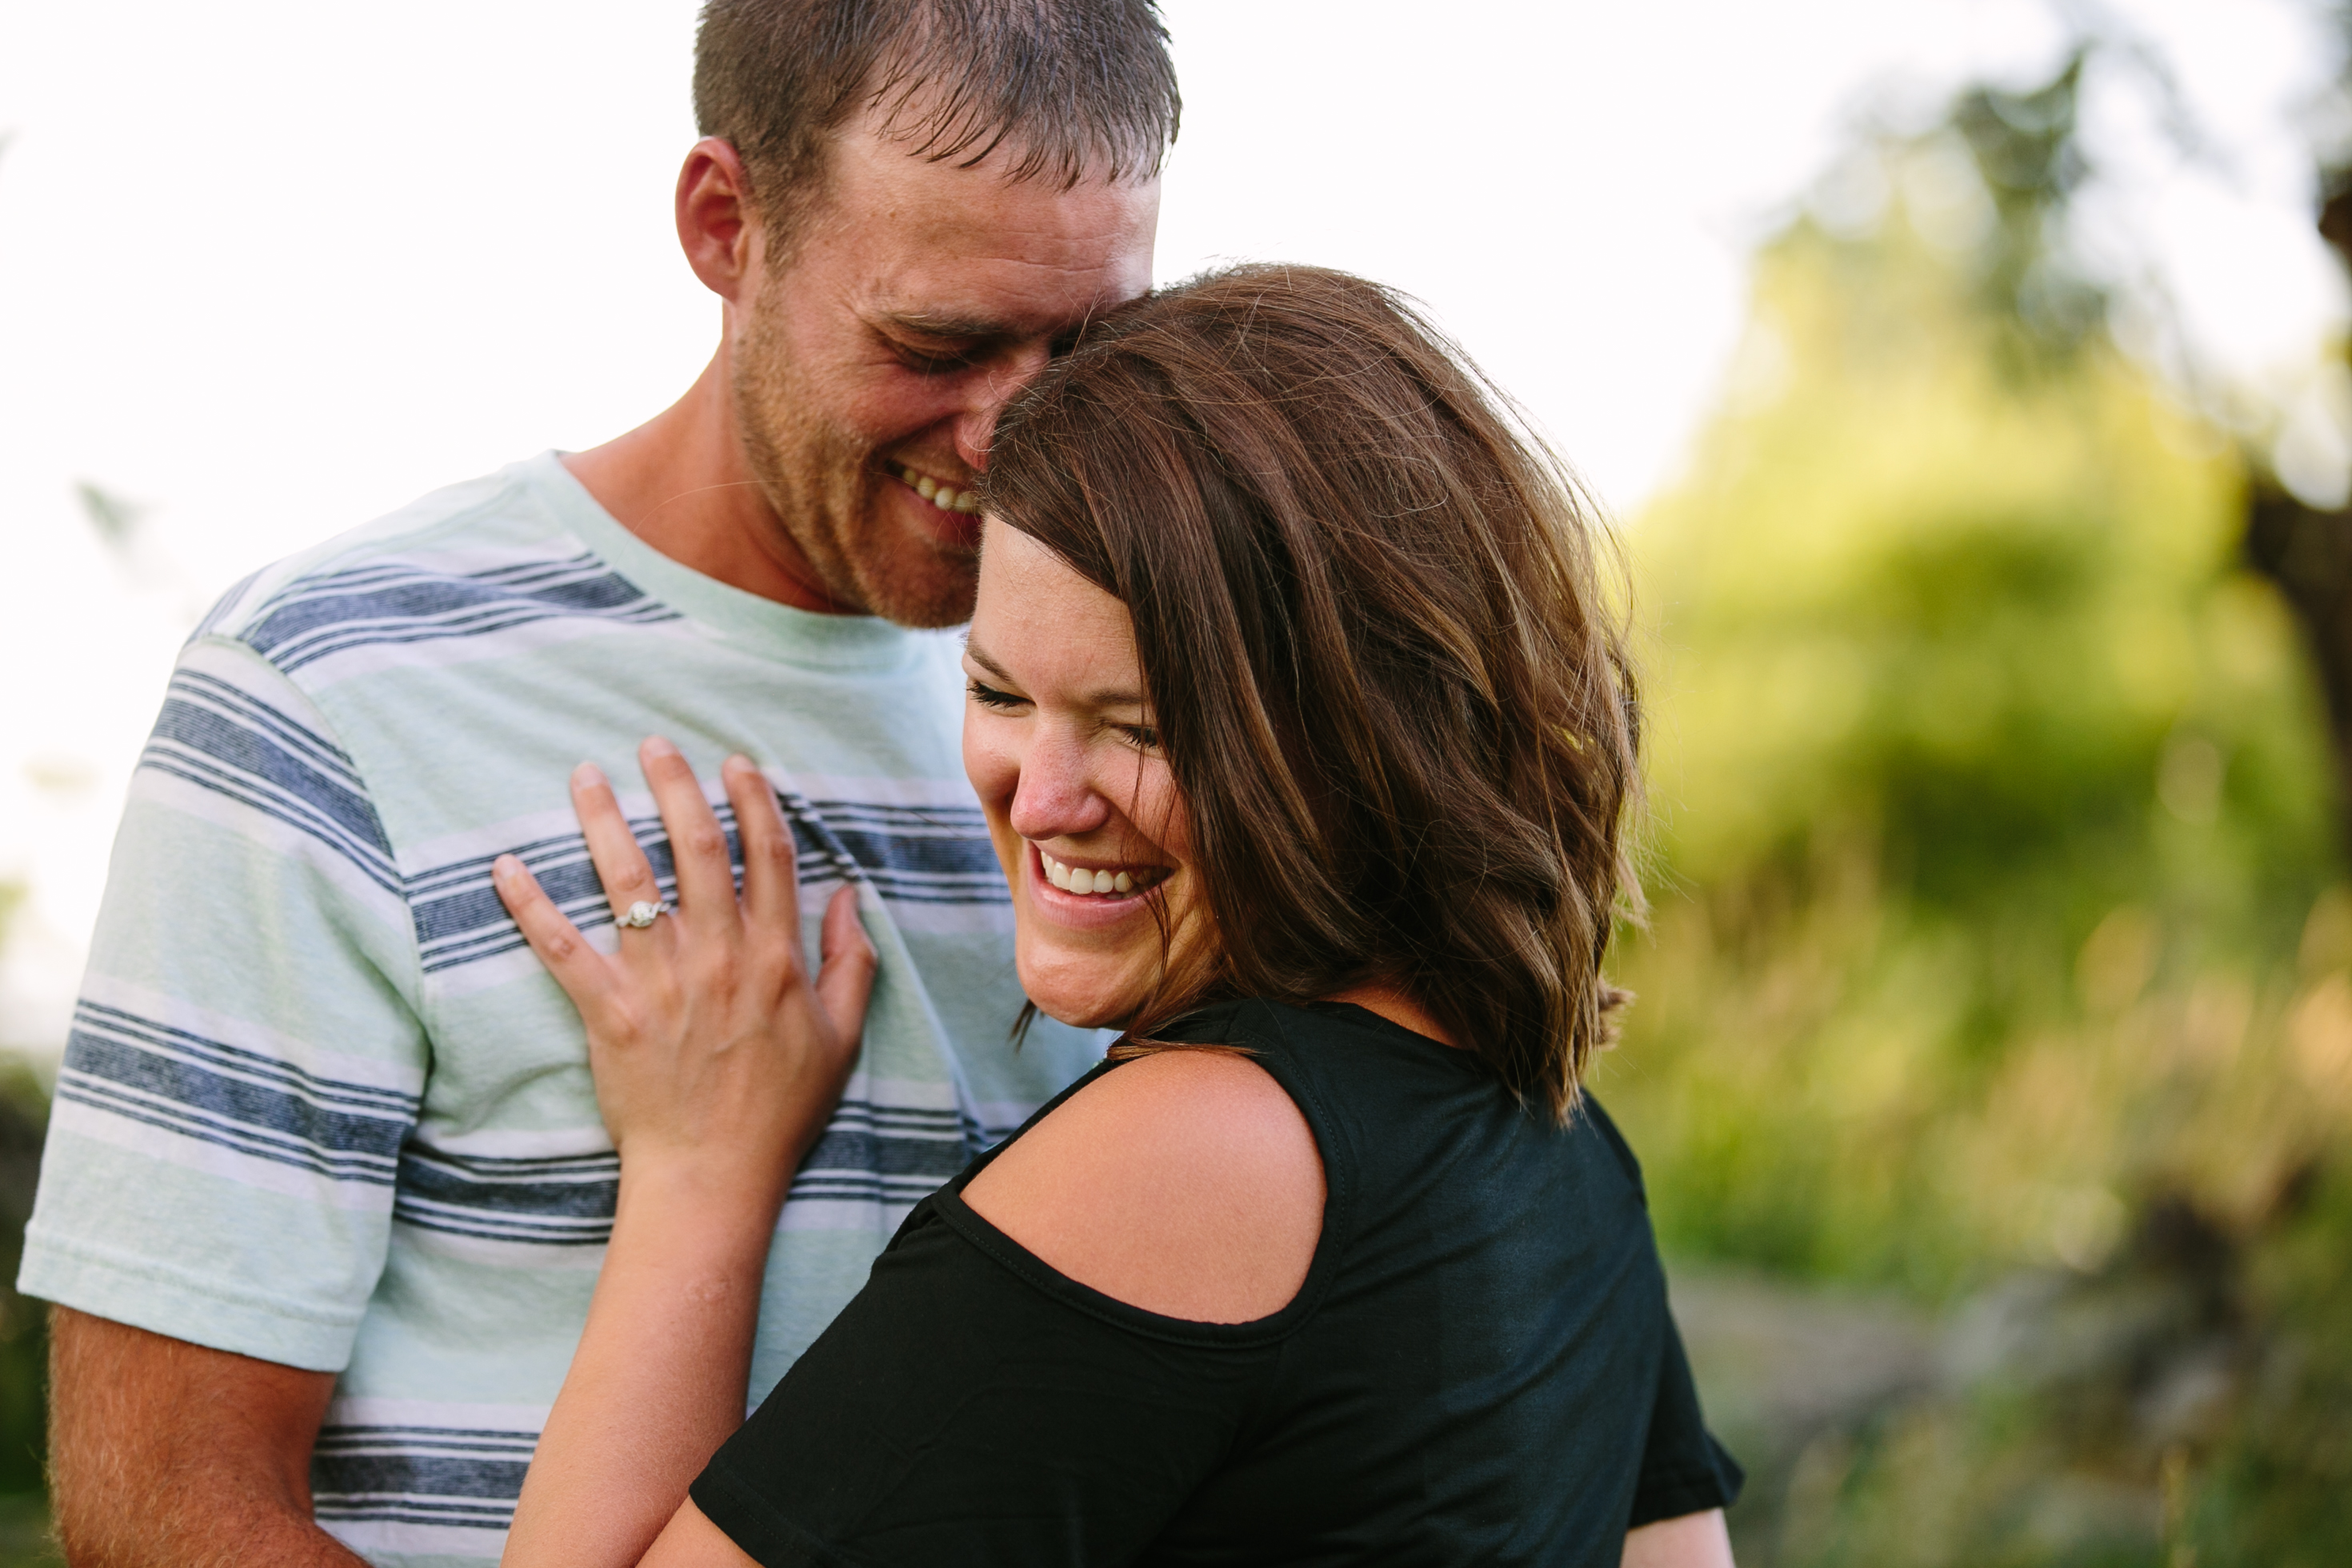 outdoor dubuque engagement session by catherine furlin photography, couple together showing engagement ring